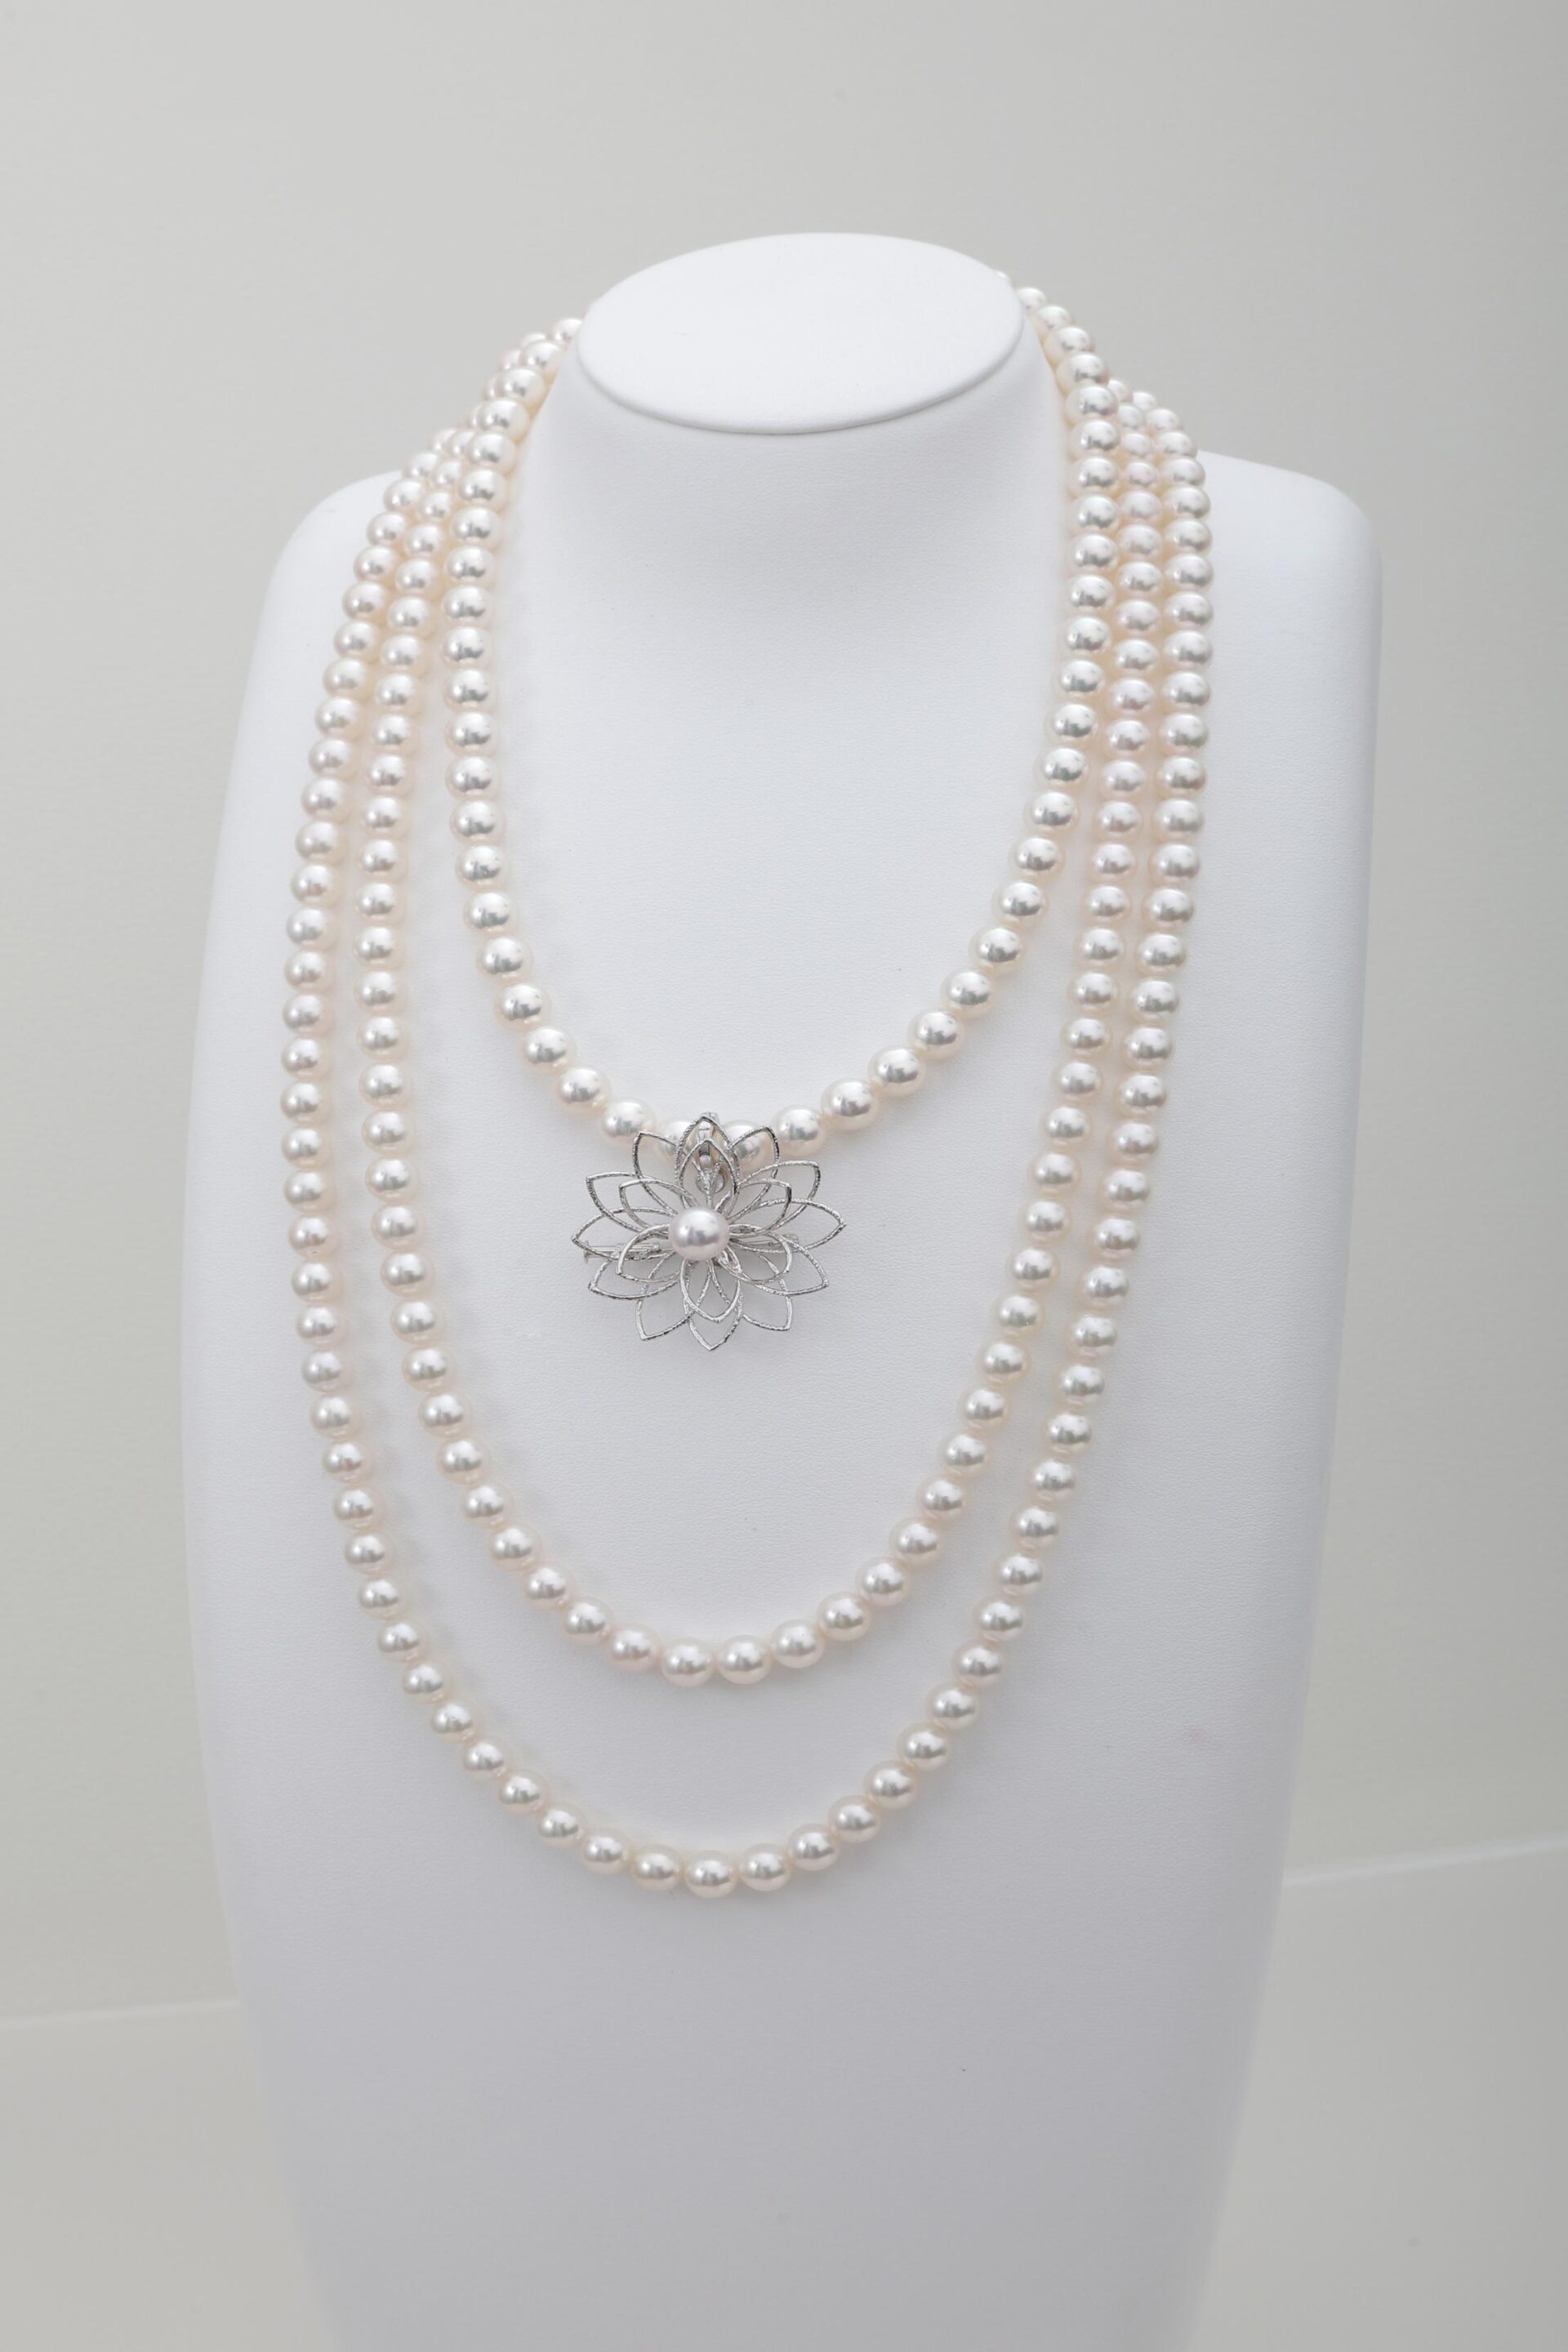 Elegance Personified: Discover the Allure of Pearl Pendant Necklaces – Mother of Pearl and Akoya Pearl Pendants